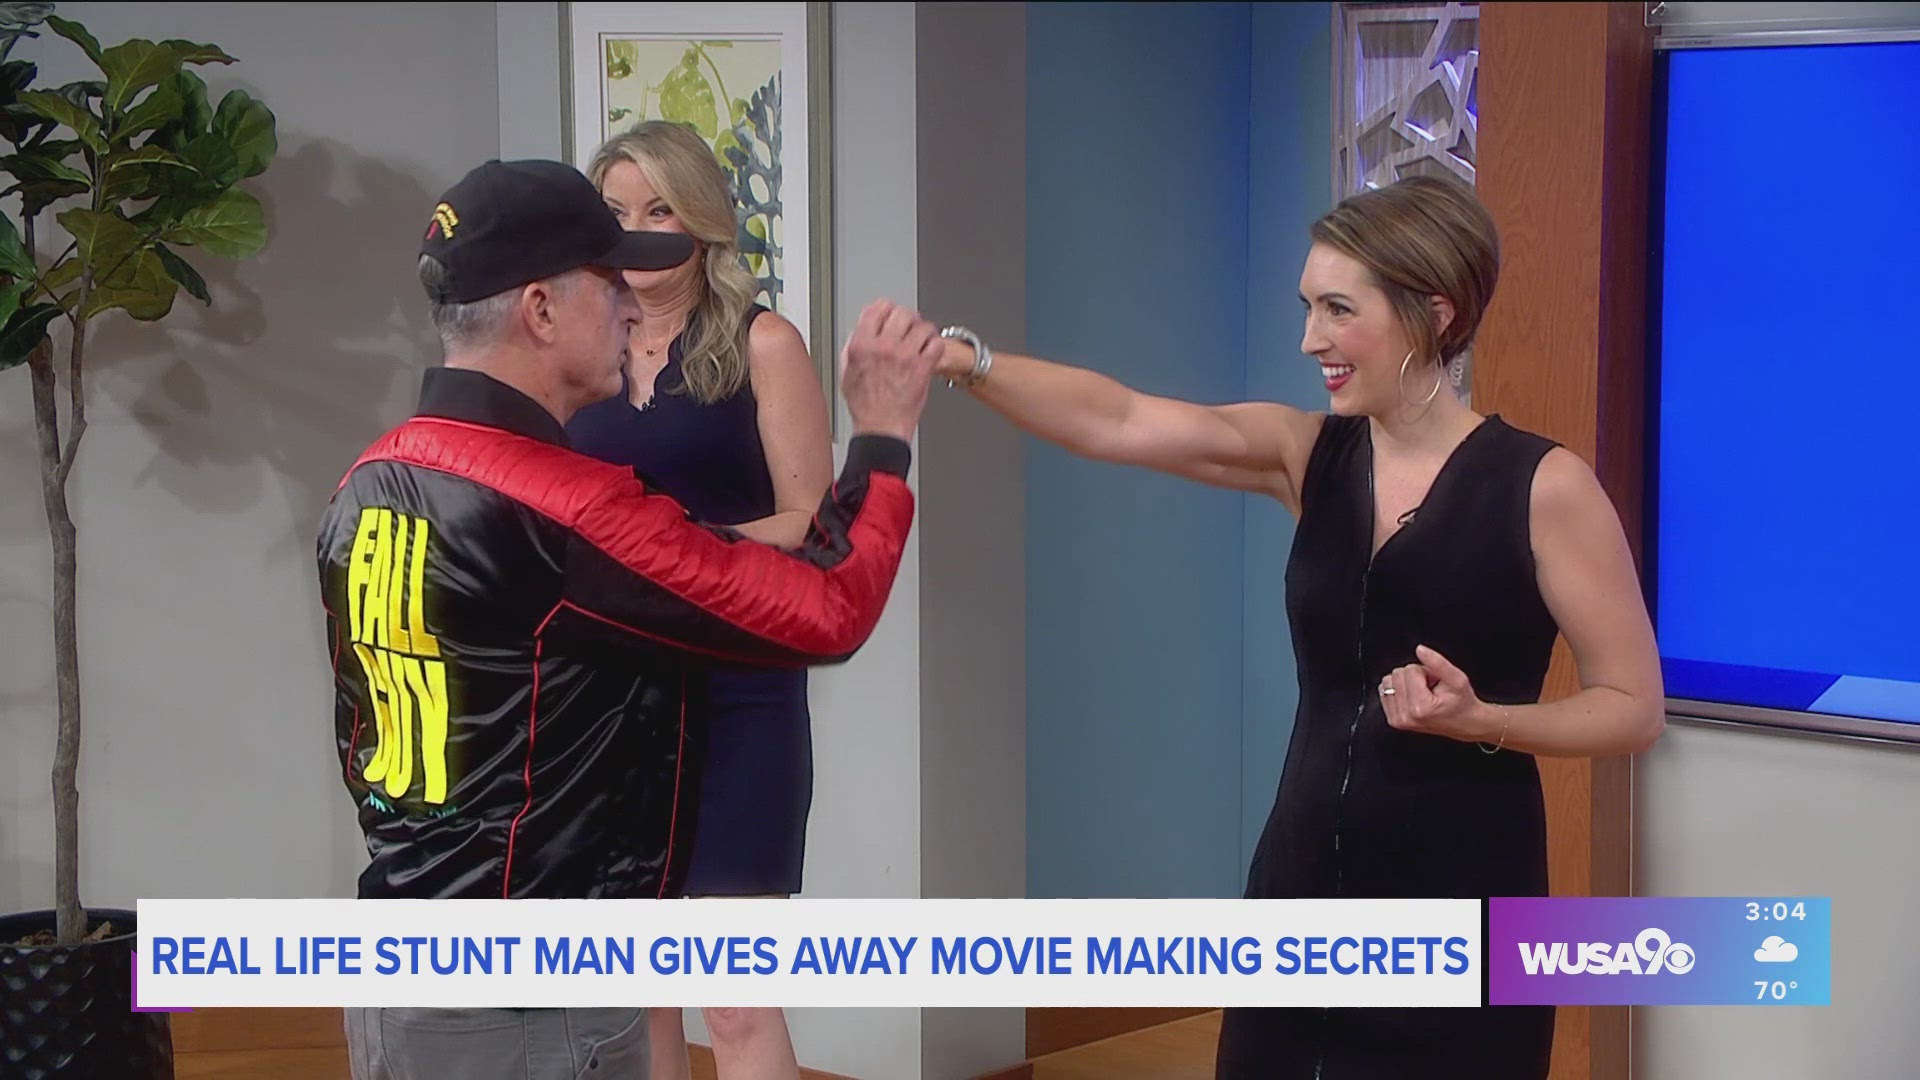 Maryland based professional stuntman Rick Kain gives a behind the scenes look at the new movie "The Fall Guy" starring Ryan Gosling and Emily Blunt.